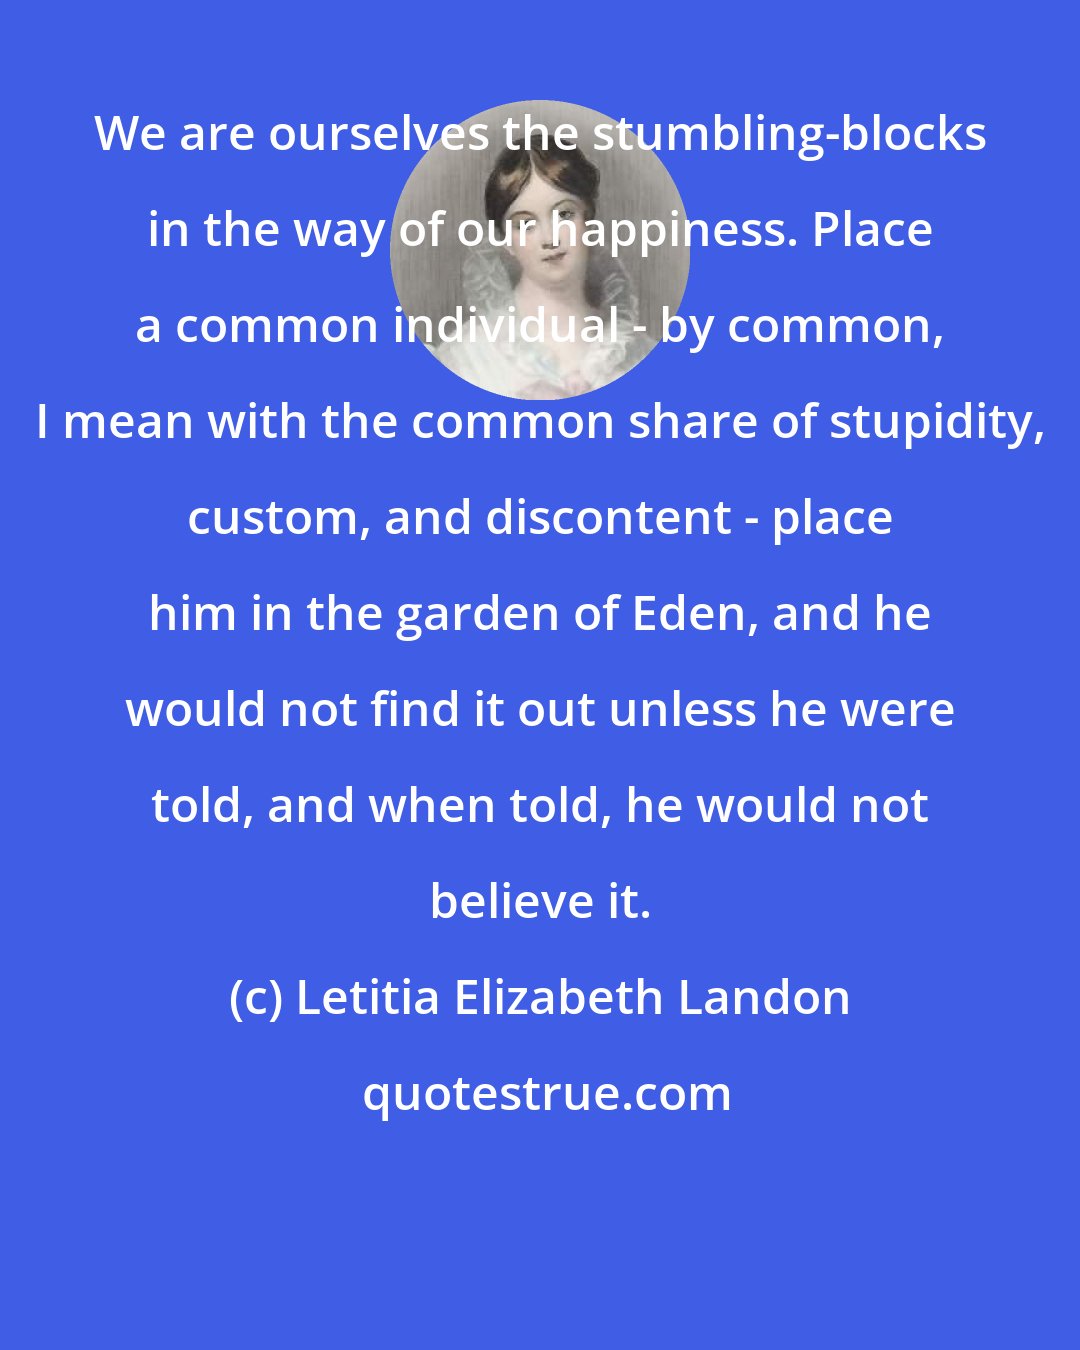 Letitia Elizabeth Landon: We are ourselves the stumbling-blocks in the way of our happiness. Place a common individual - by common, I mean with the common share of stupidity, custom, and discontent - place him in the garden of Eden, and he would not find it out unless he were told, and when told, he would not believe it.